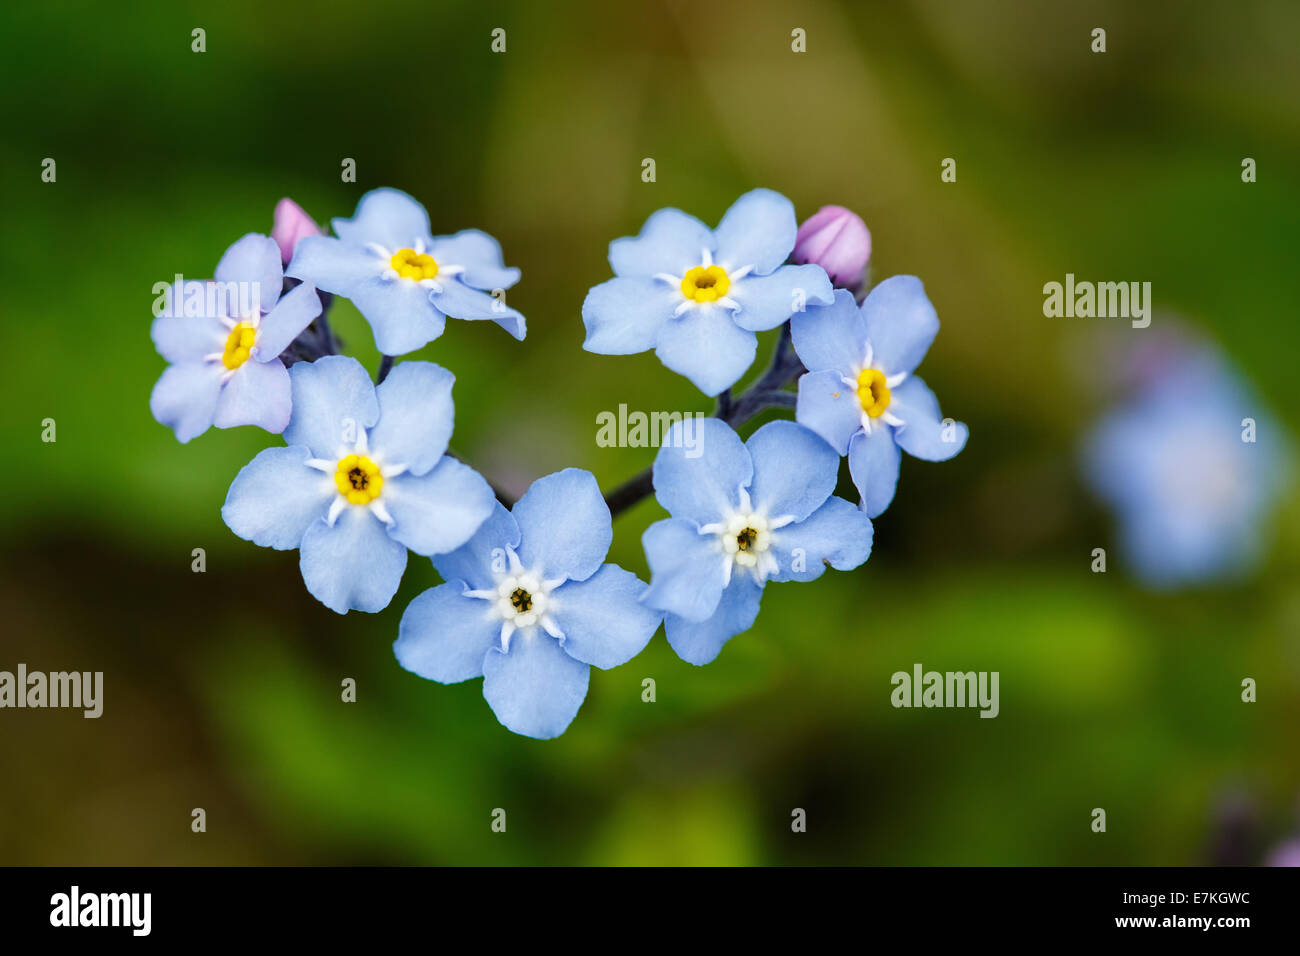 Forget-me-not flowers Stock Photo